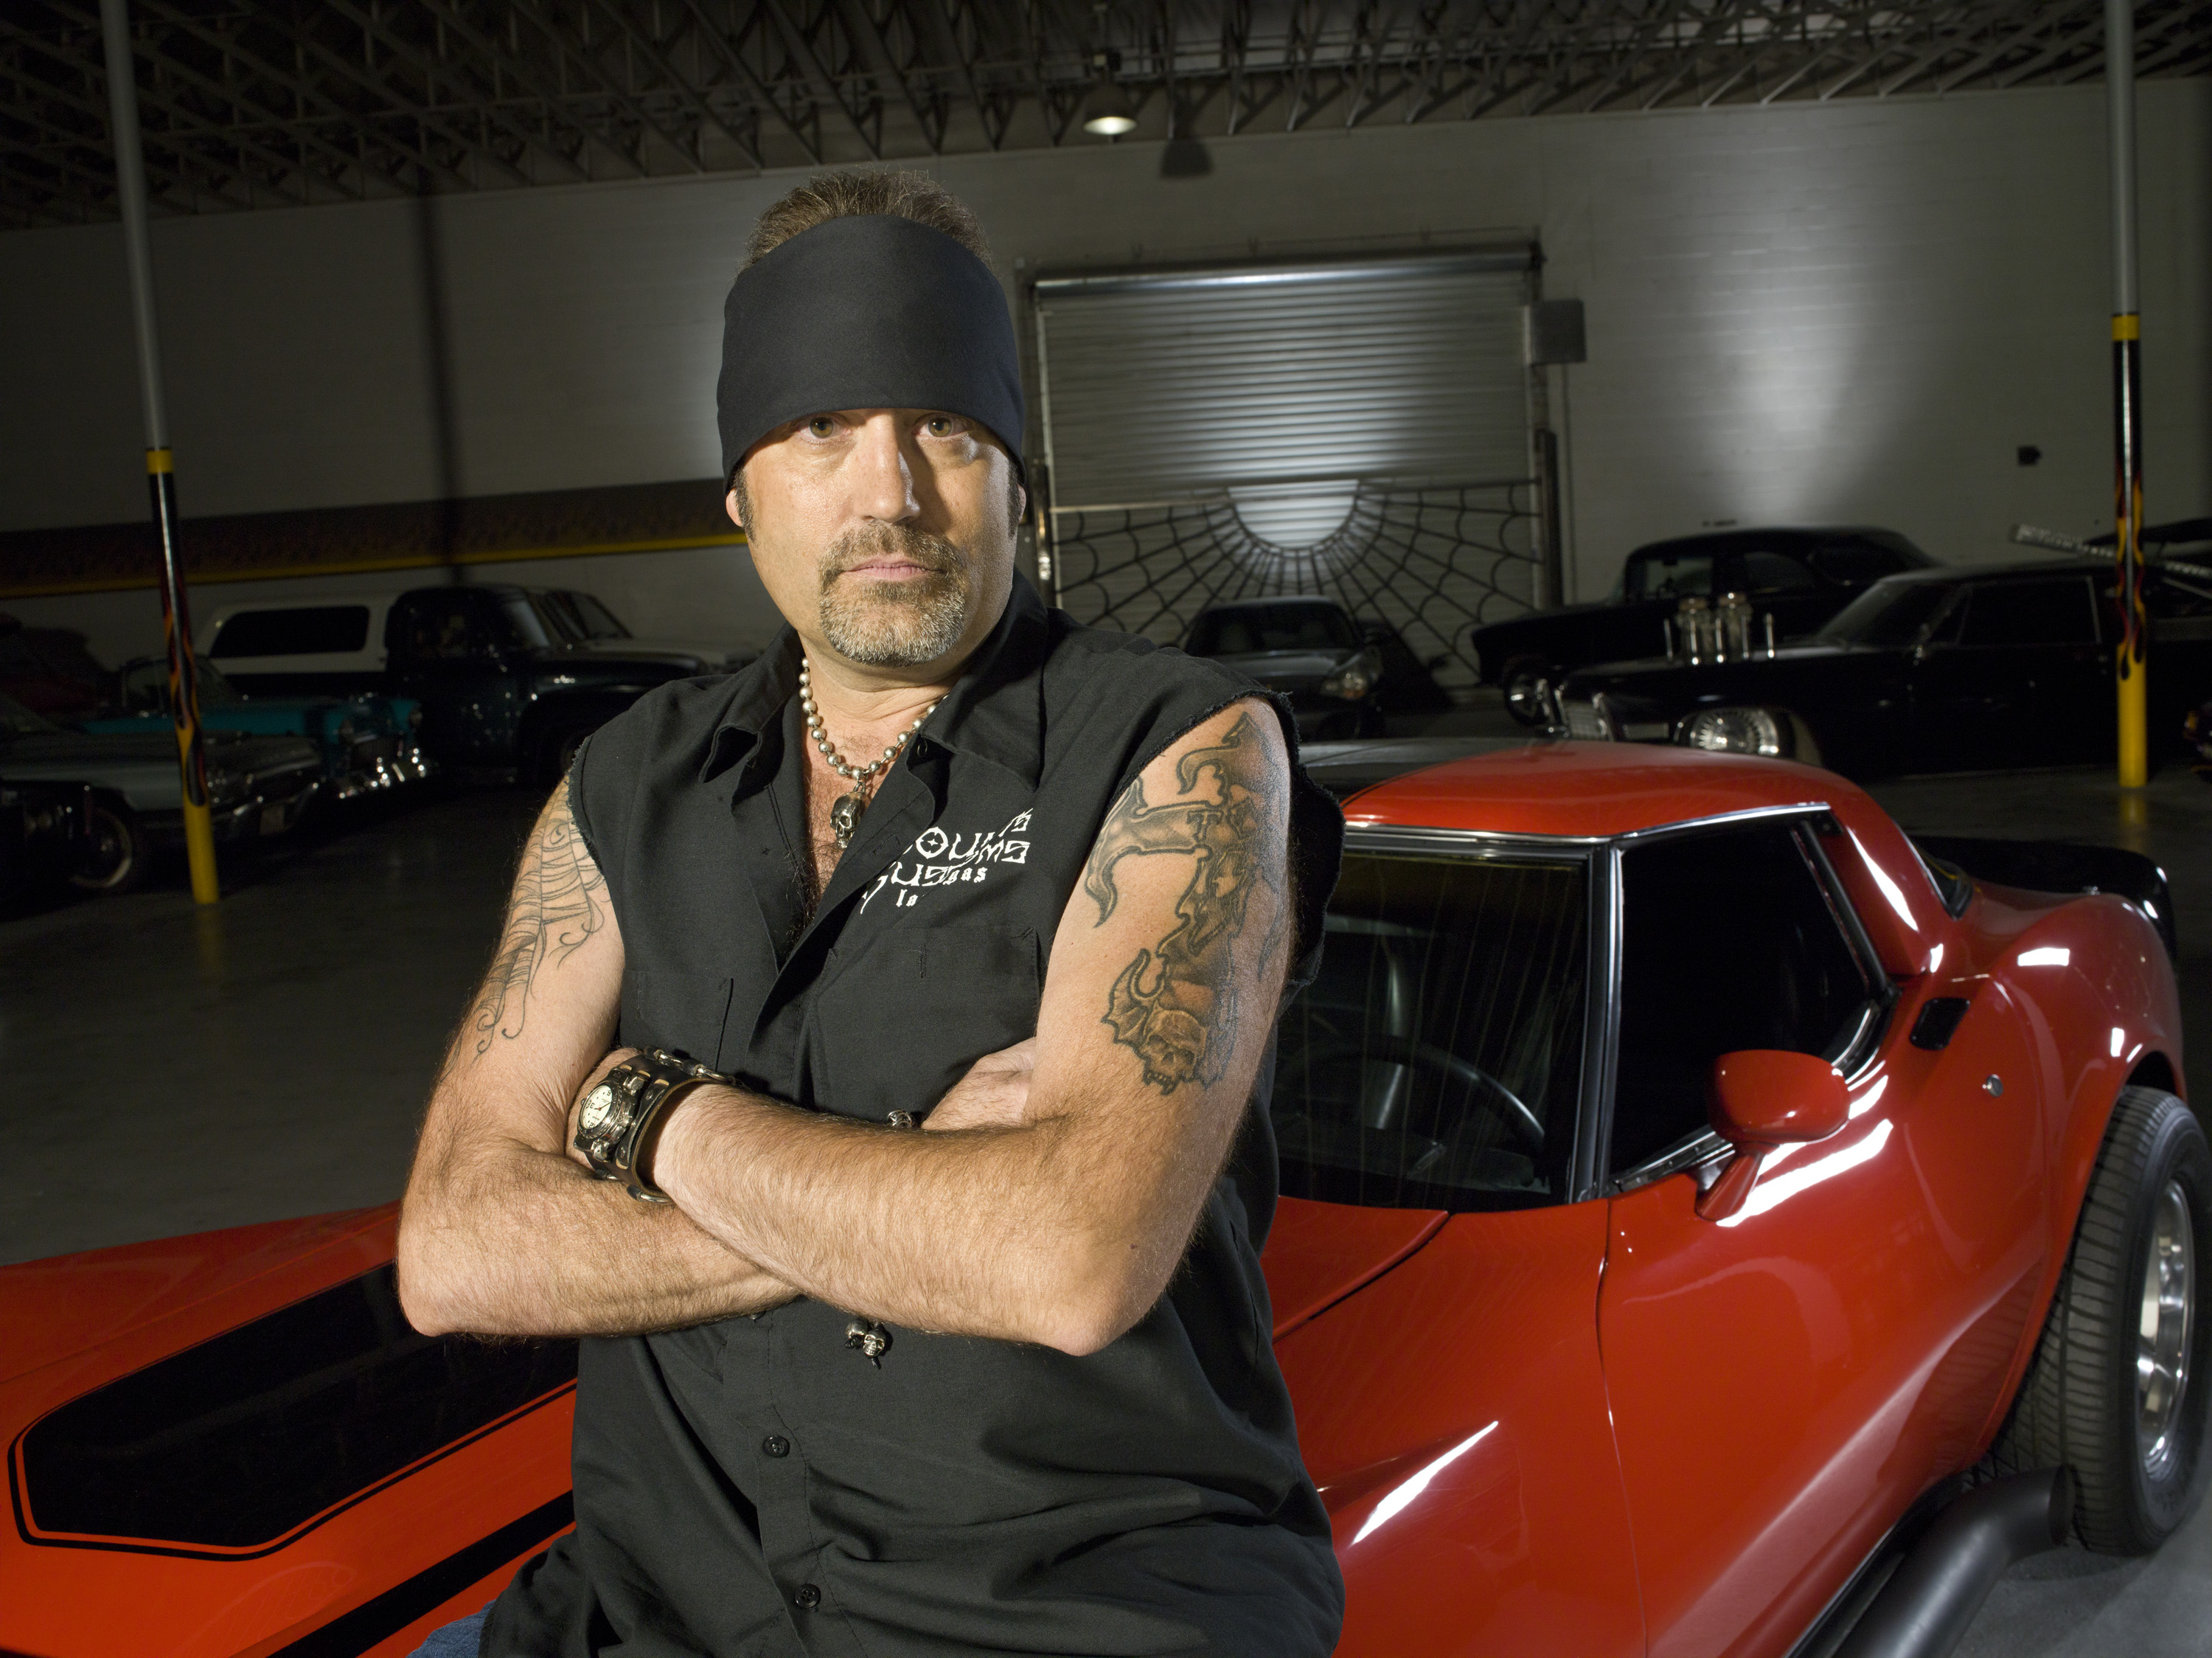 Counting Cars #17